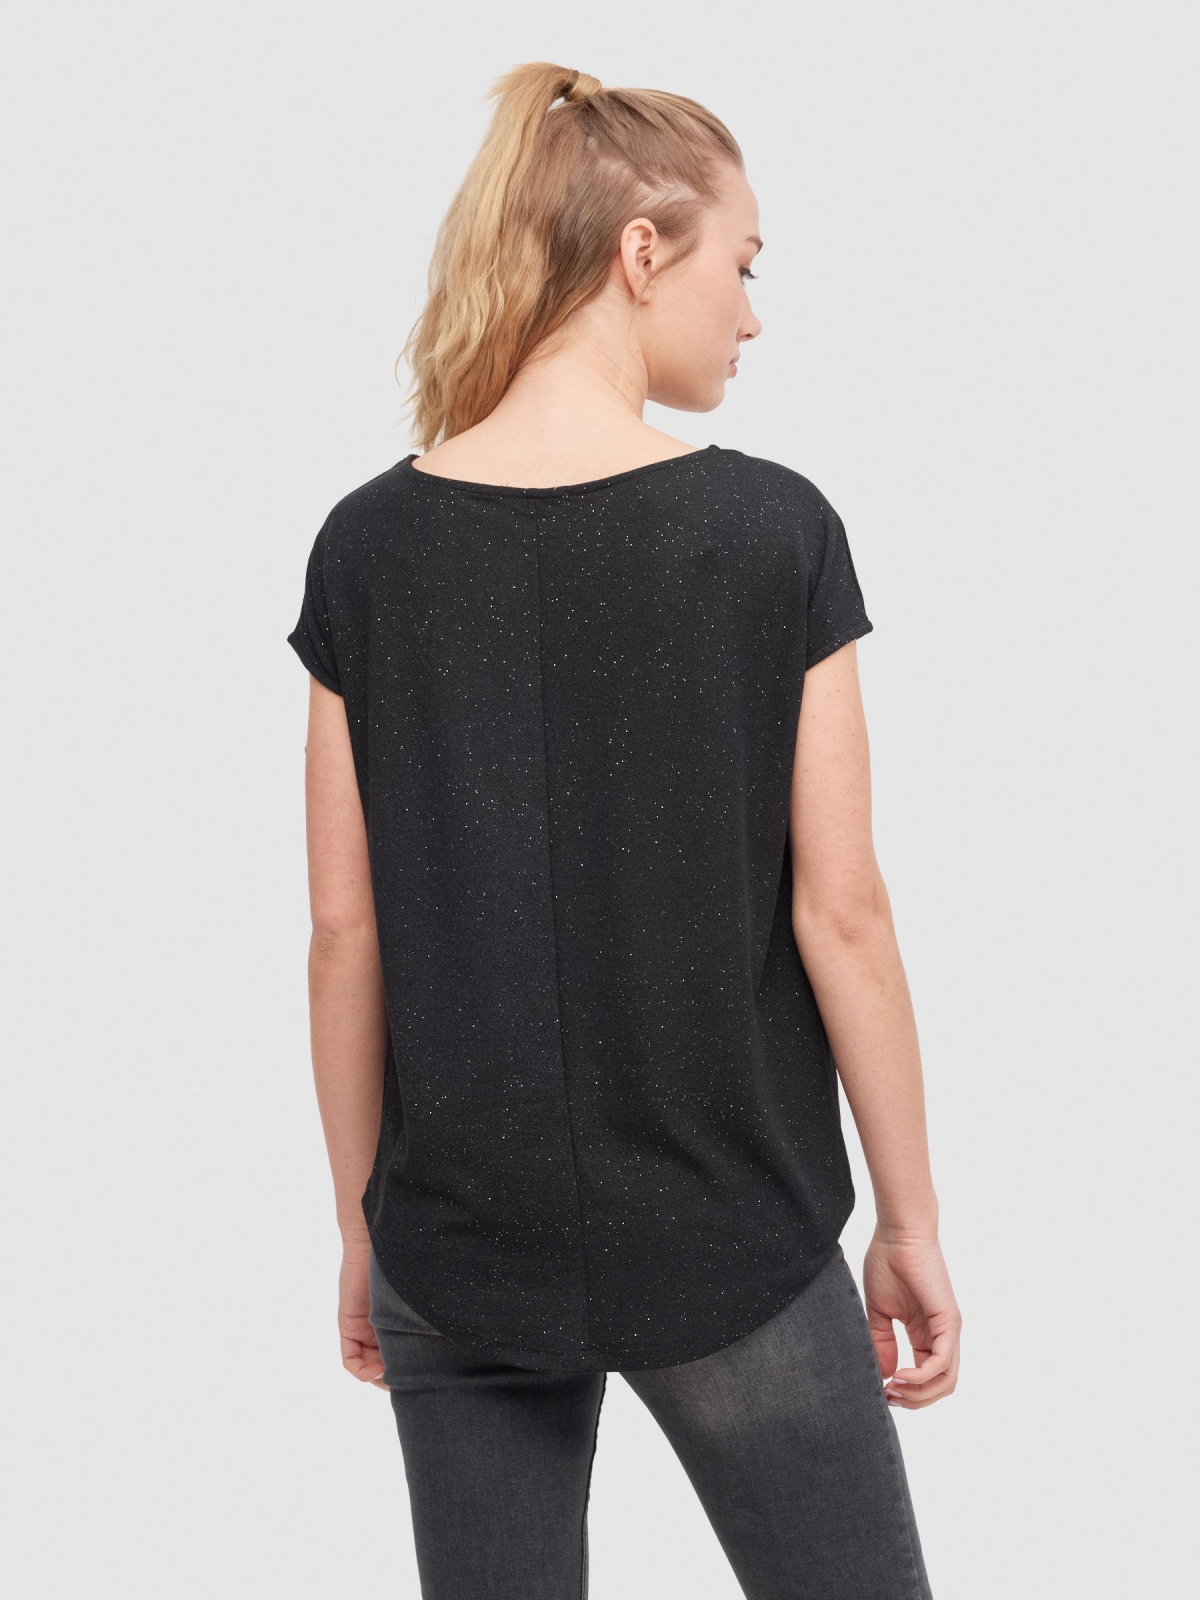 Text oversize t-shirt black middle back view